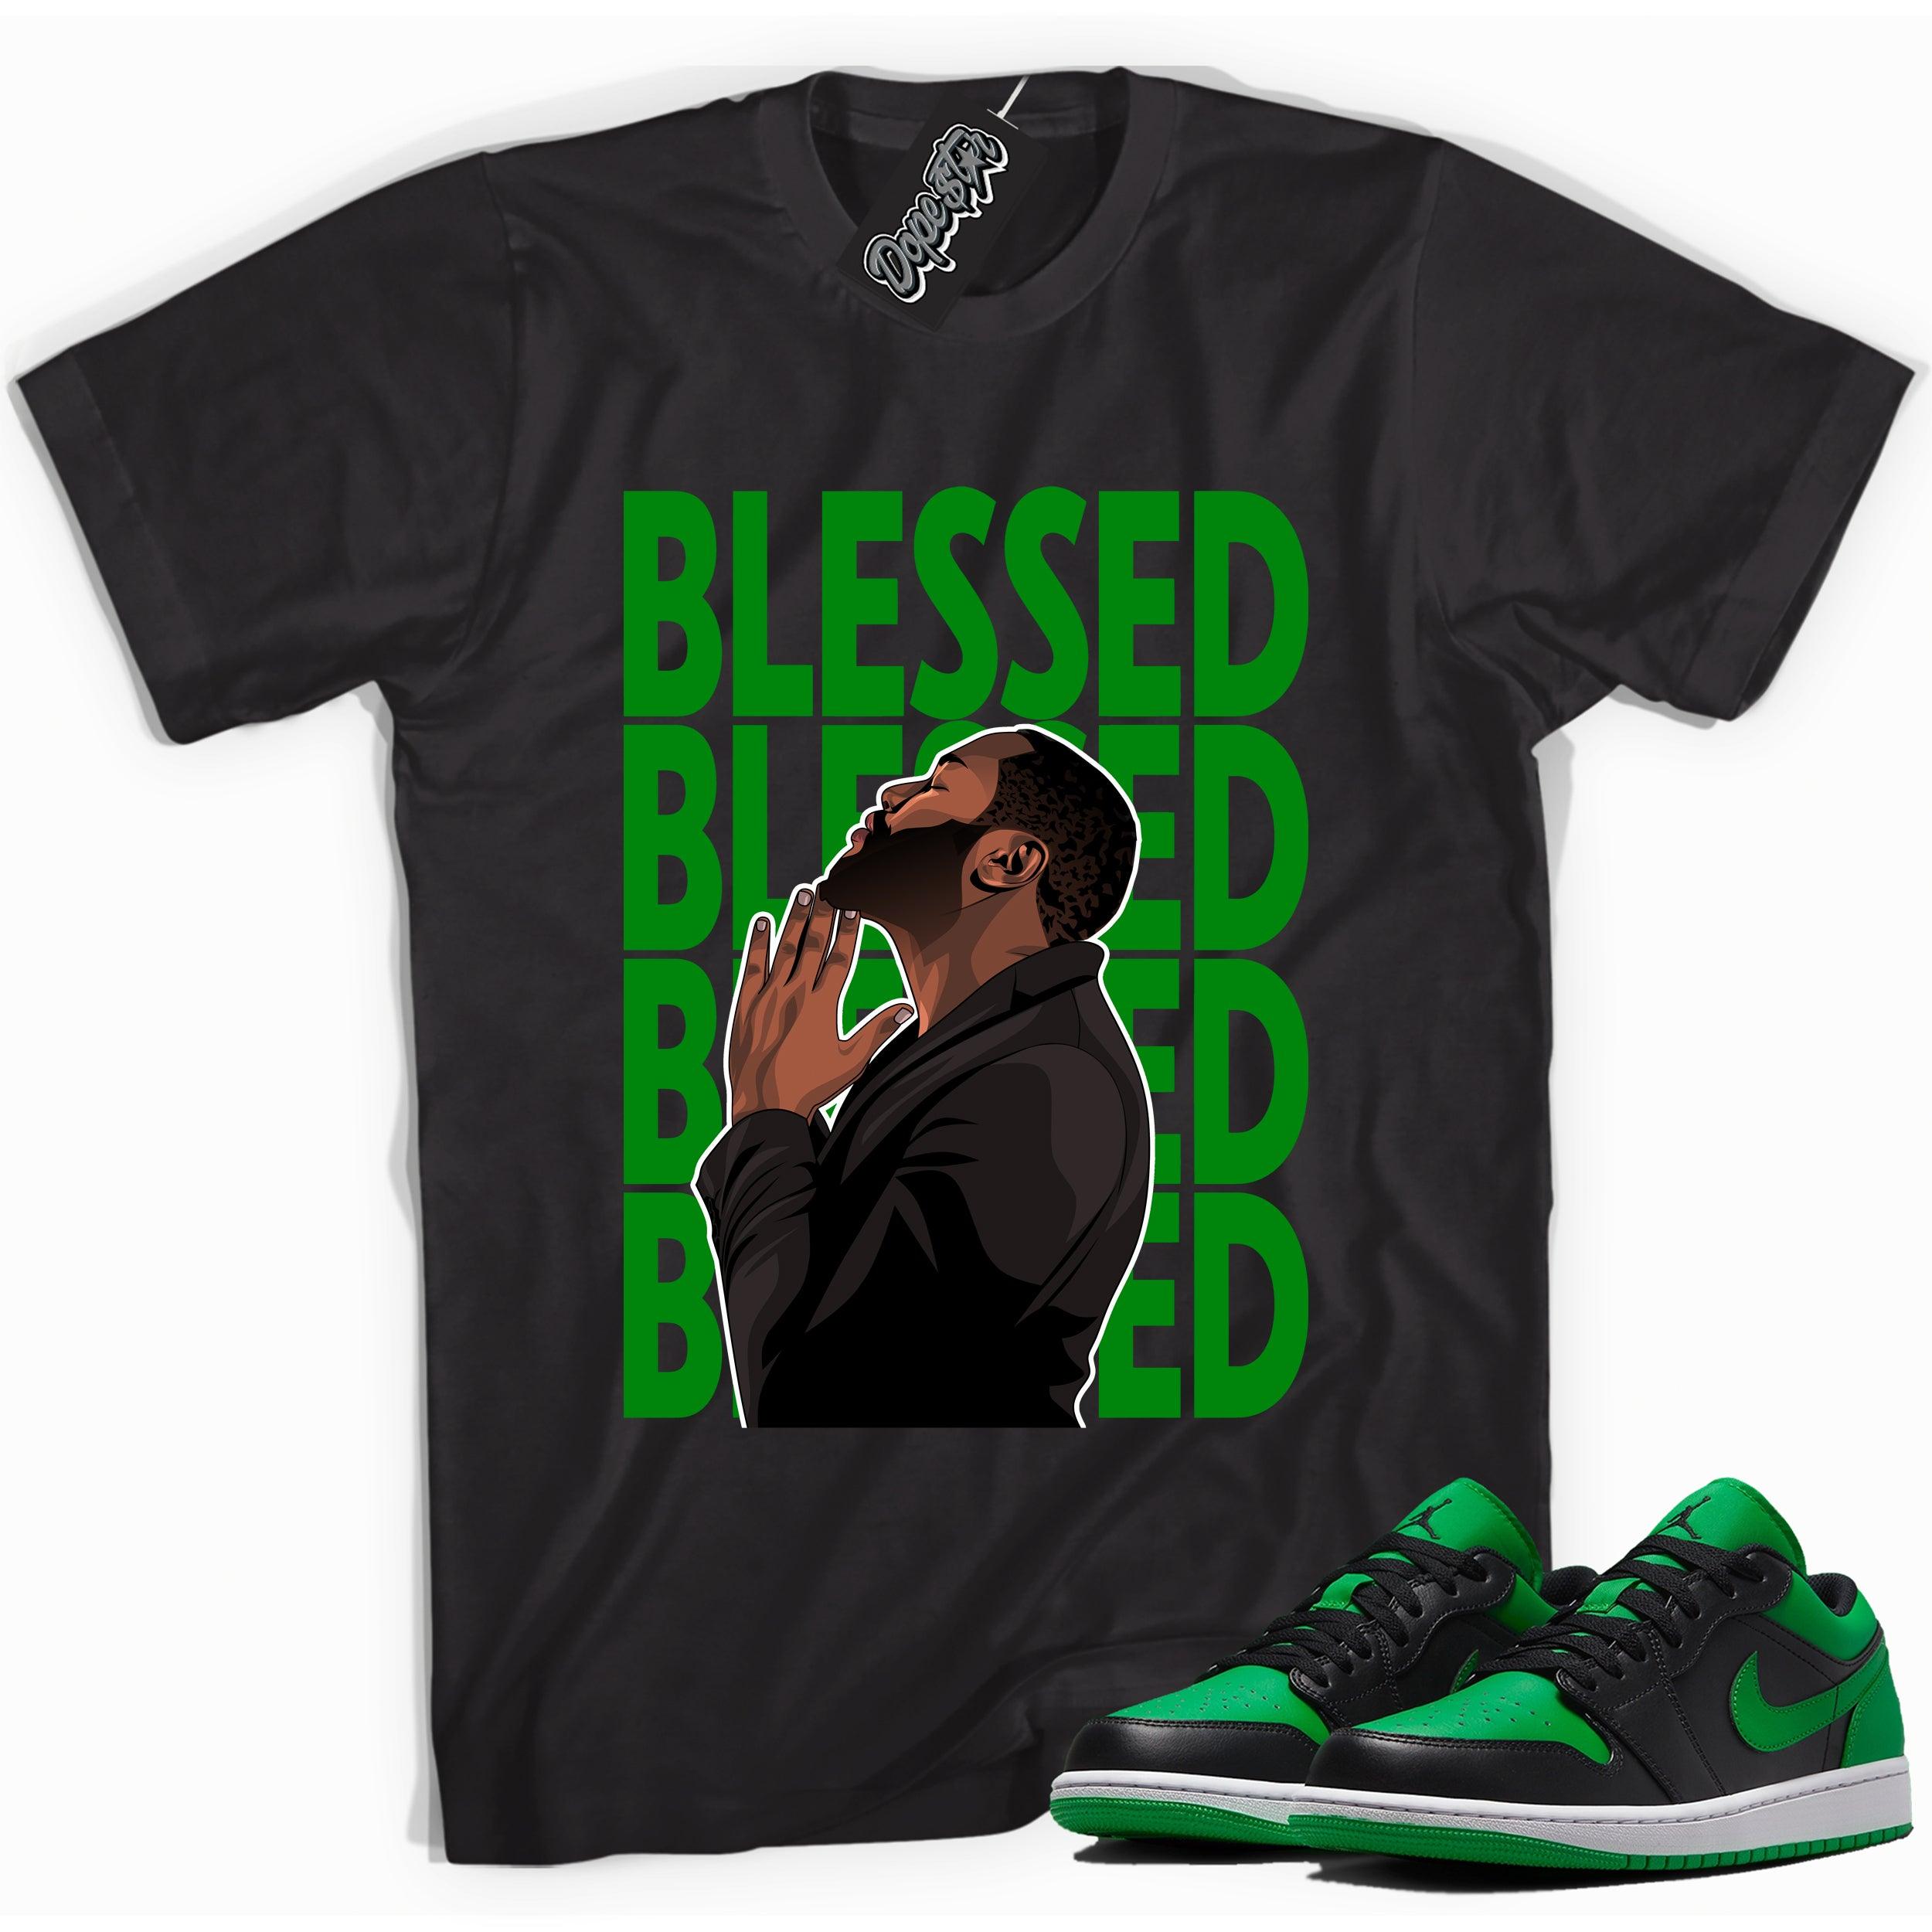 Cool black graphic tee with 'Blessed' print, that perfectly matches Air Jordan 1 Low Lucky Green sneakers